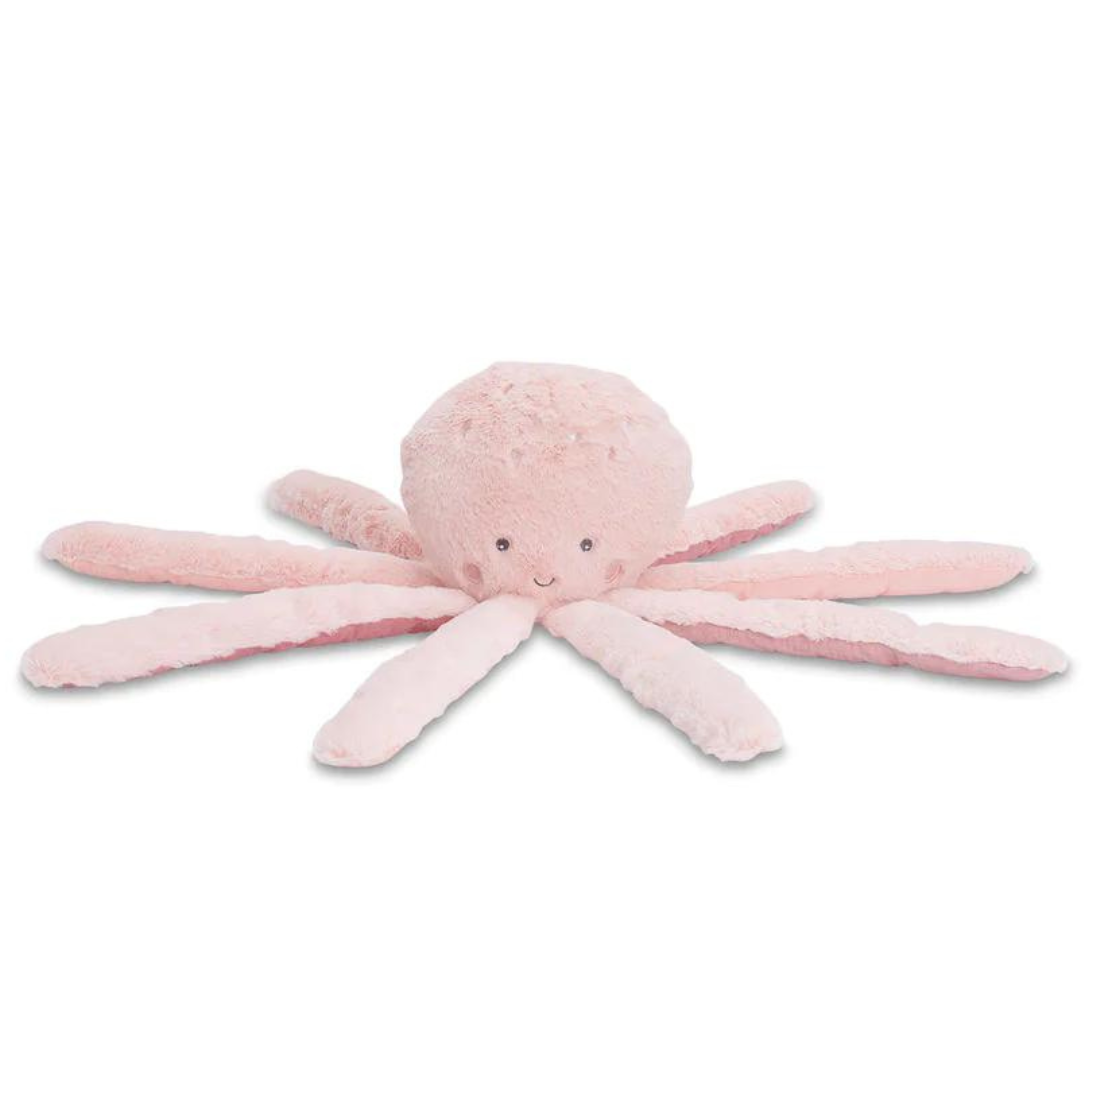 Bubble Pinky the Pink Octopus